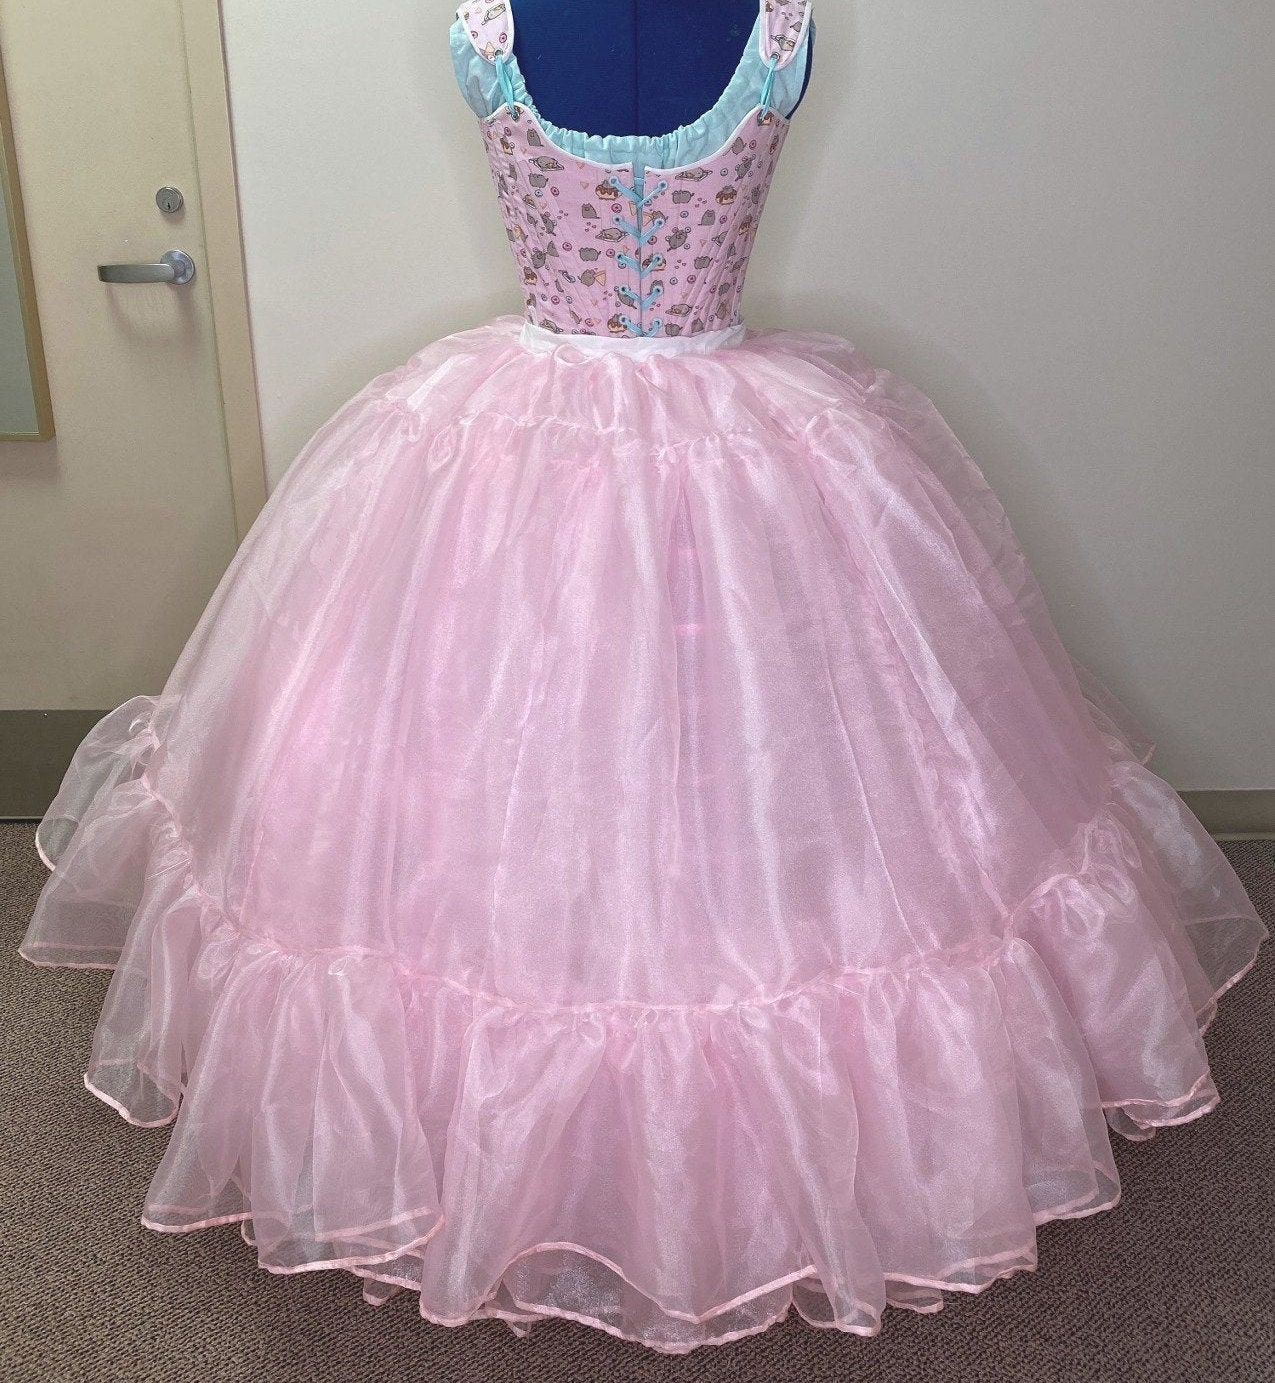 Ball Gown Petticoat 